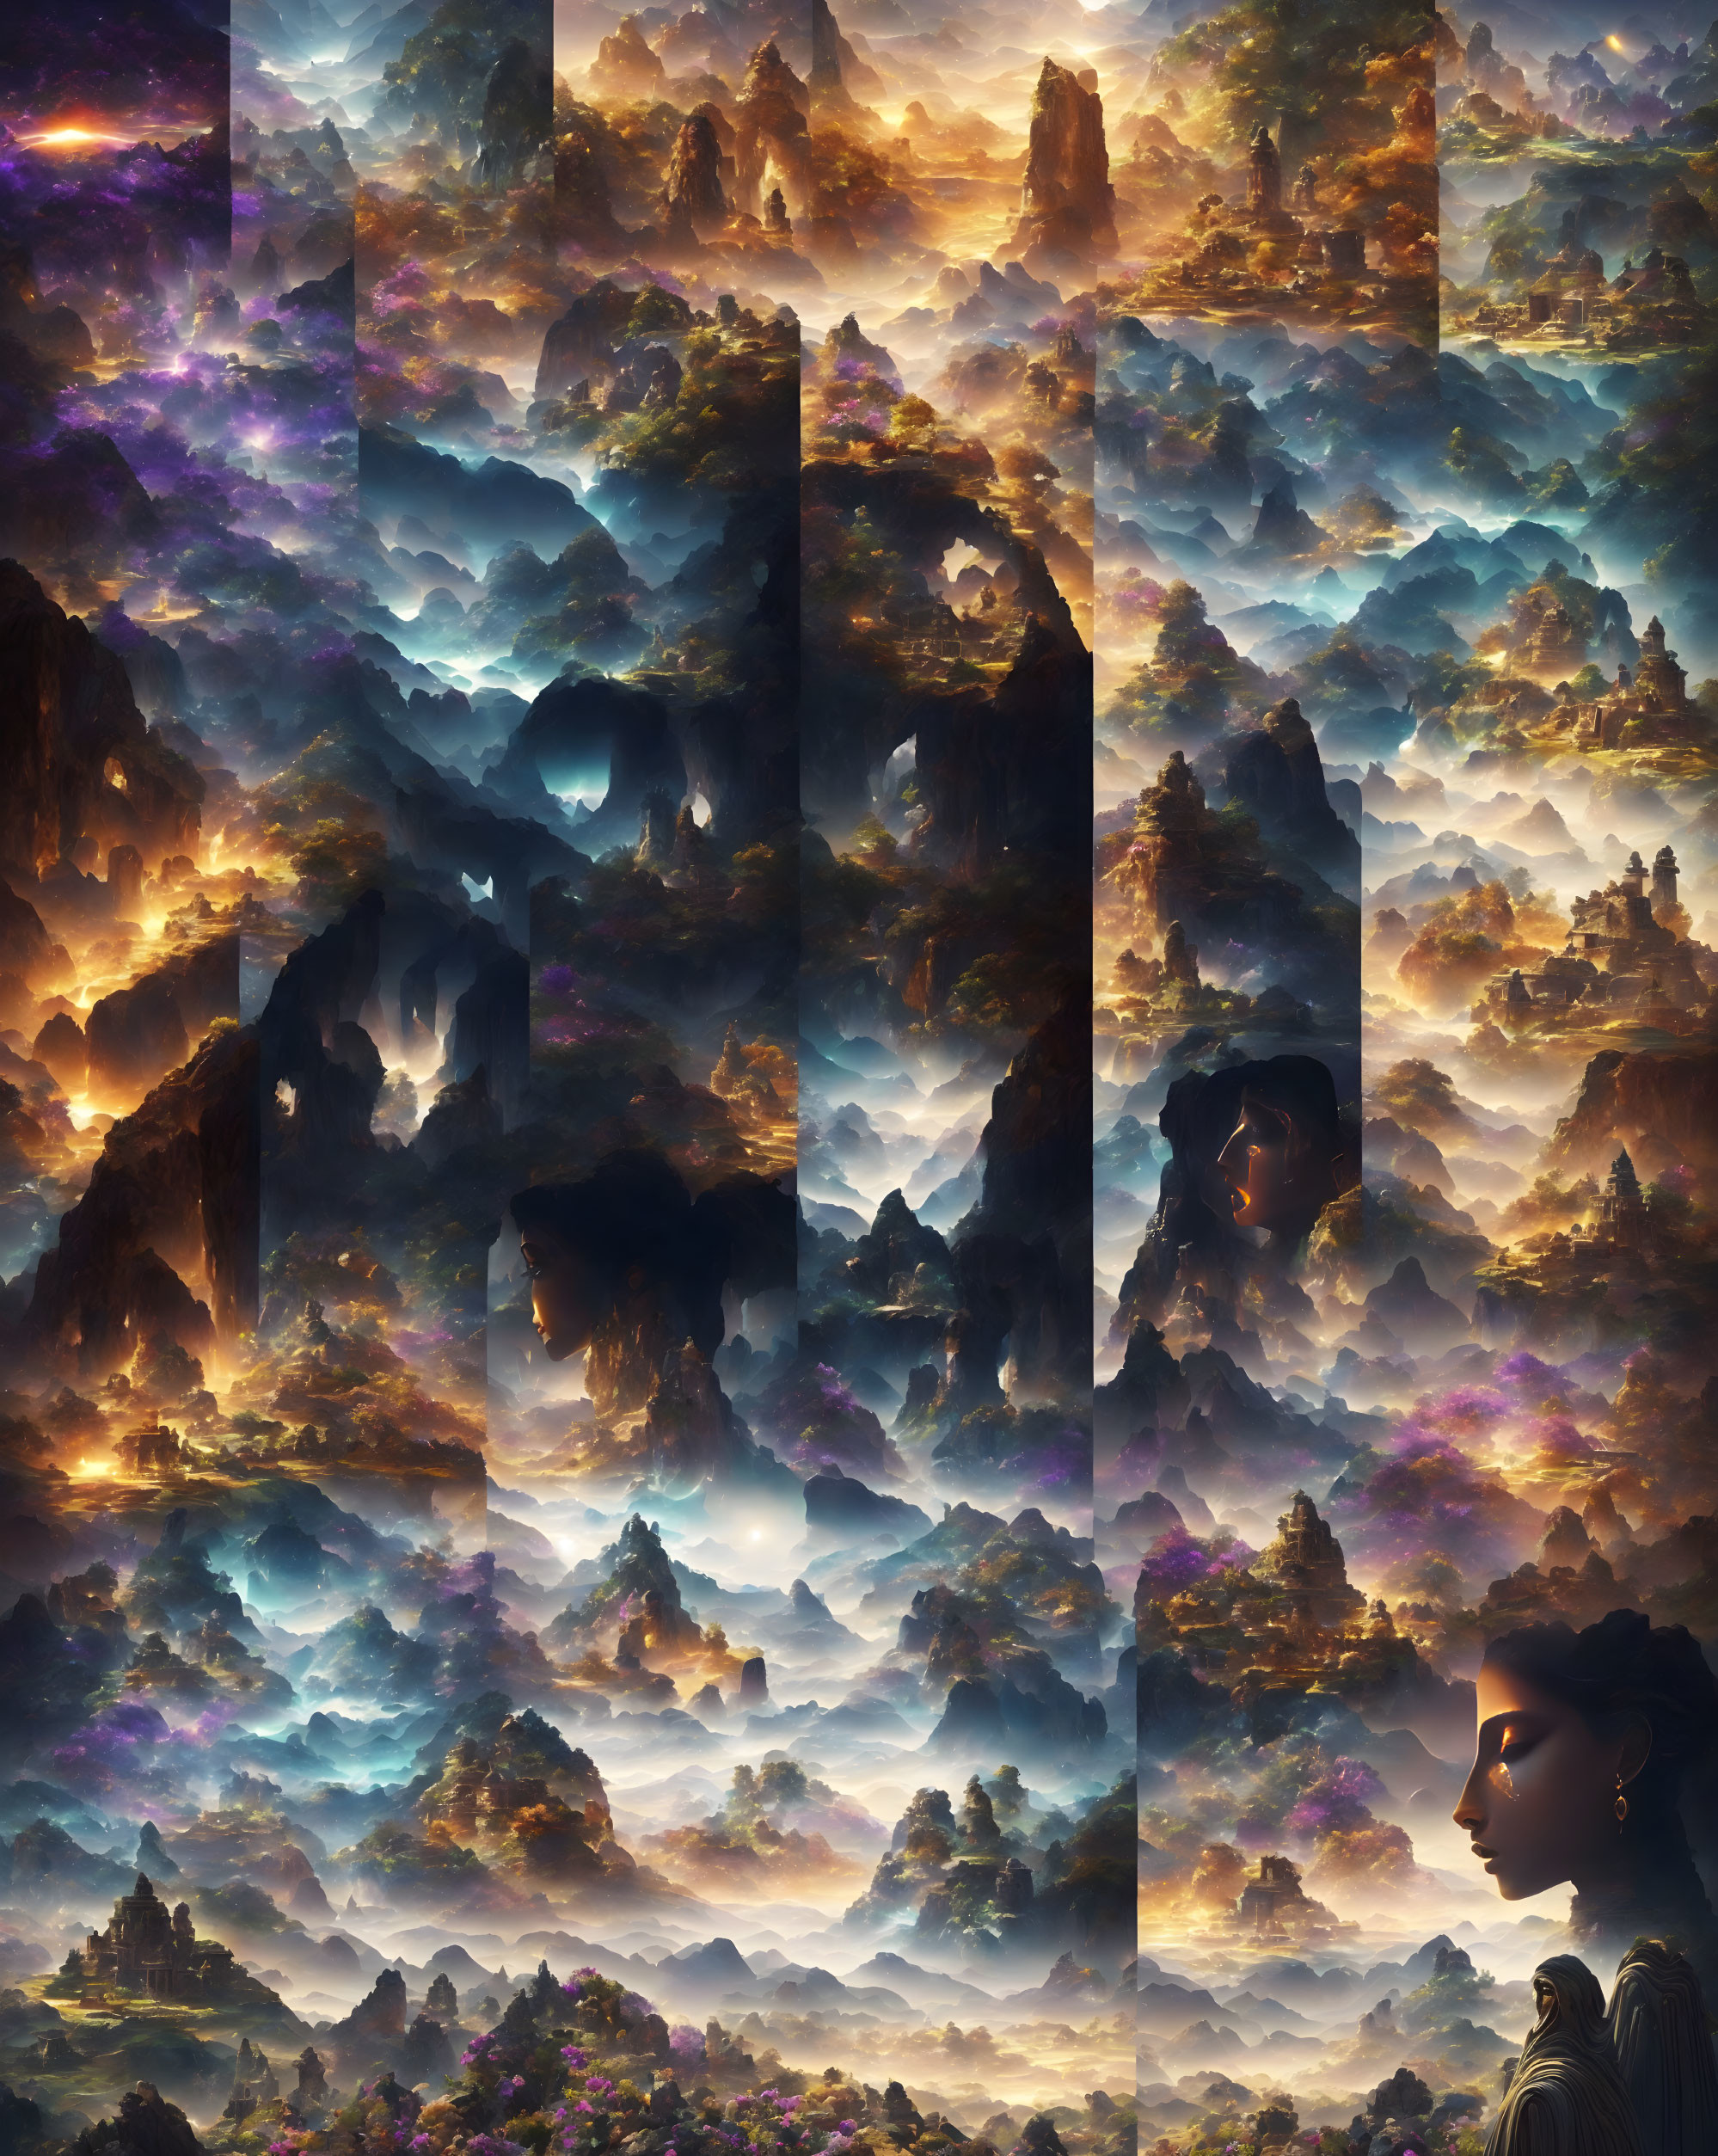 Ethereal landscape mosaic with mountains, clouds, and mystical lights forming a woman's profile.